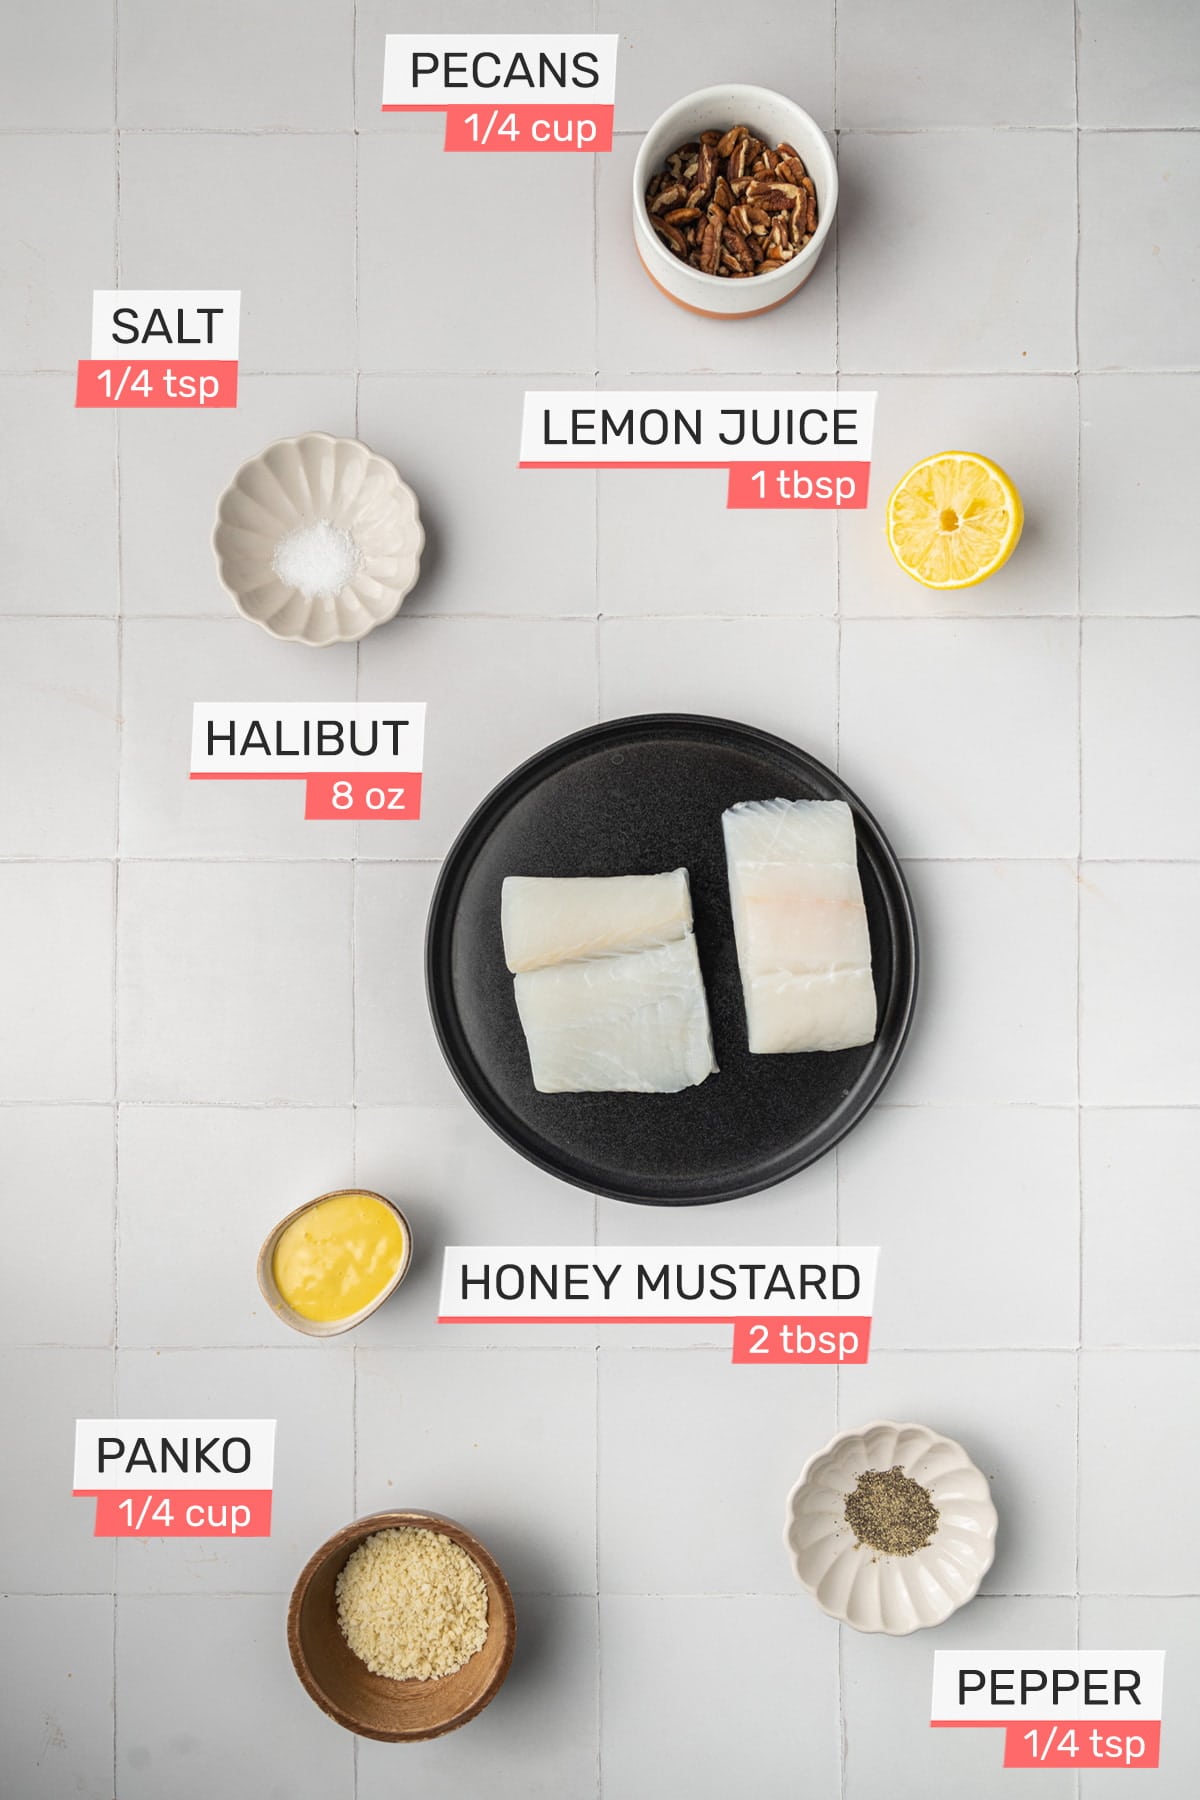 Overhead picture of all ingredients needed for Pecan Crusted Halibut on a white tile background - Pecans, Salt, Lemon Juice, Halibut, Honey Mustard, Panko, Pepper